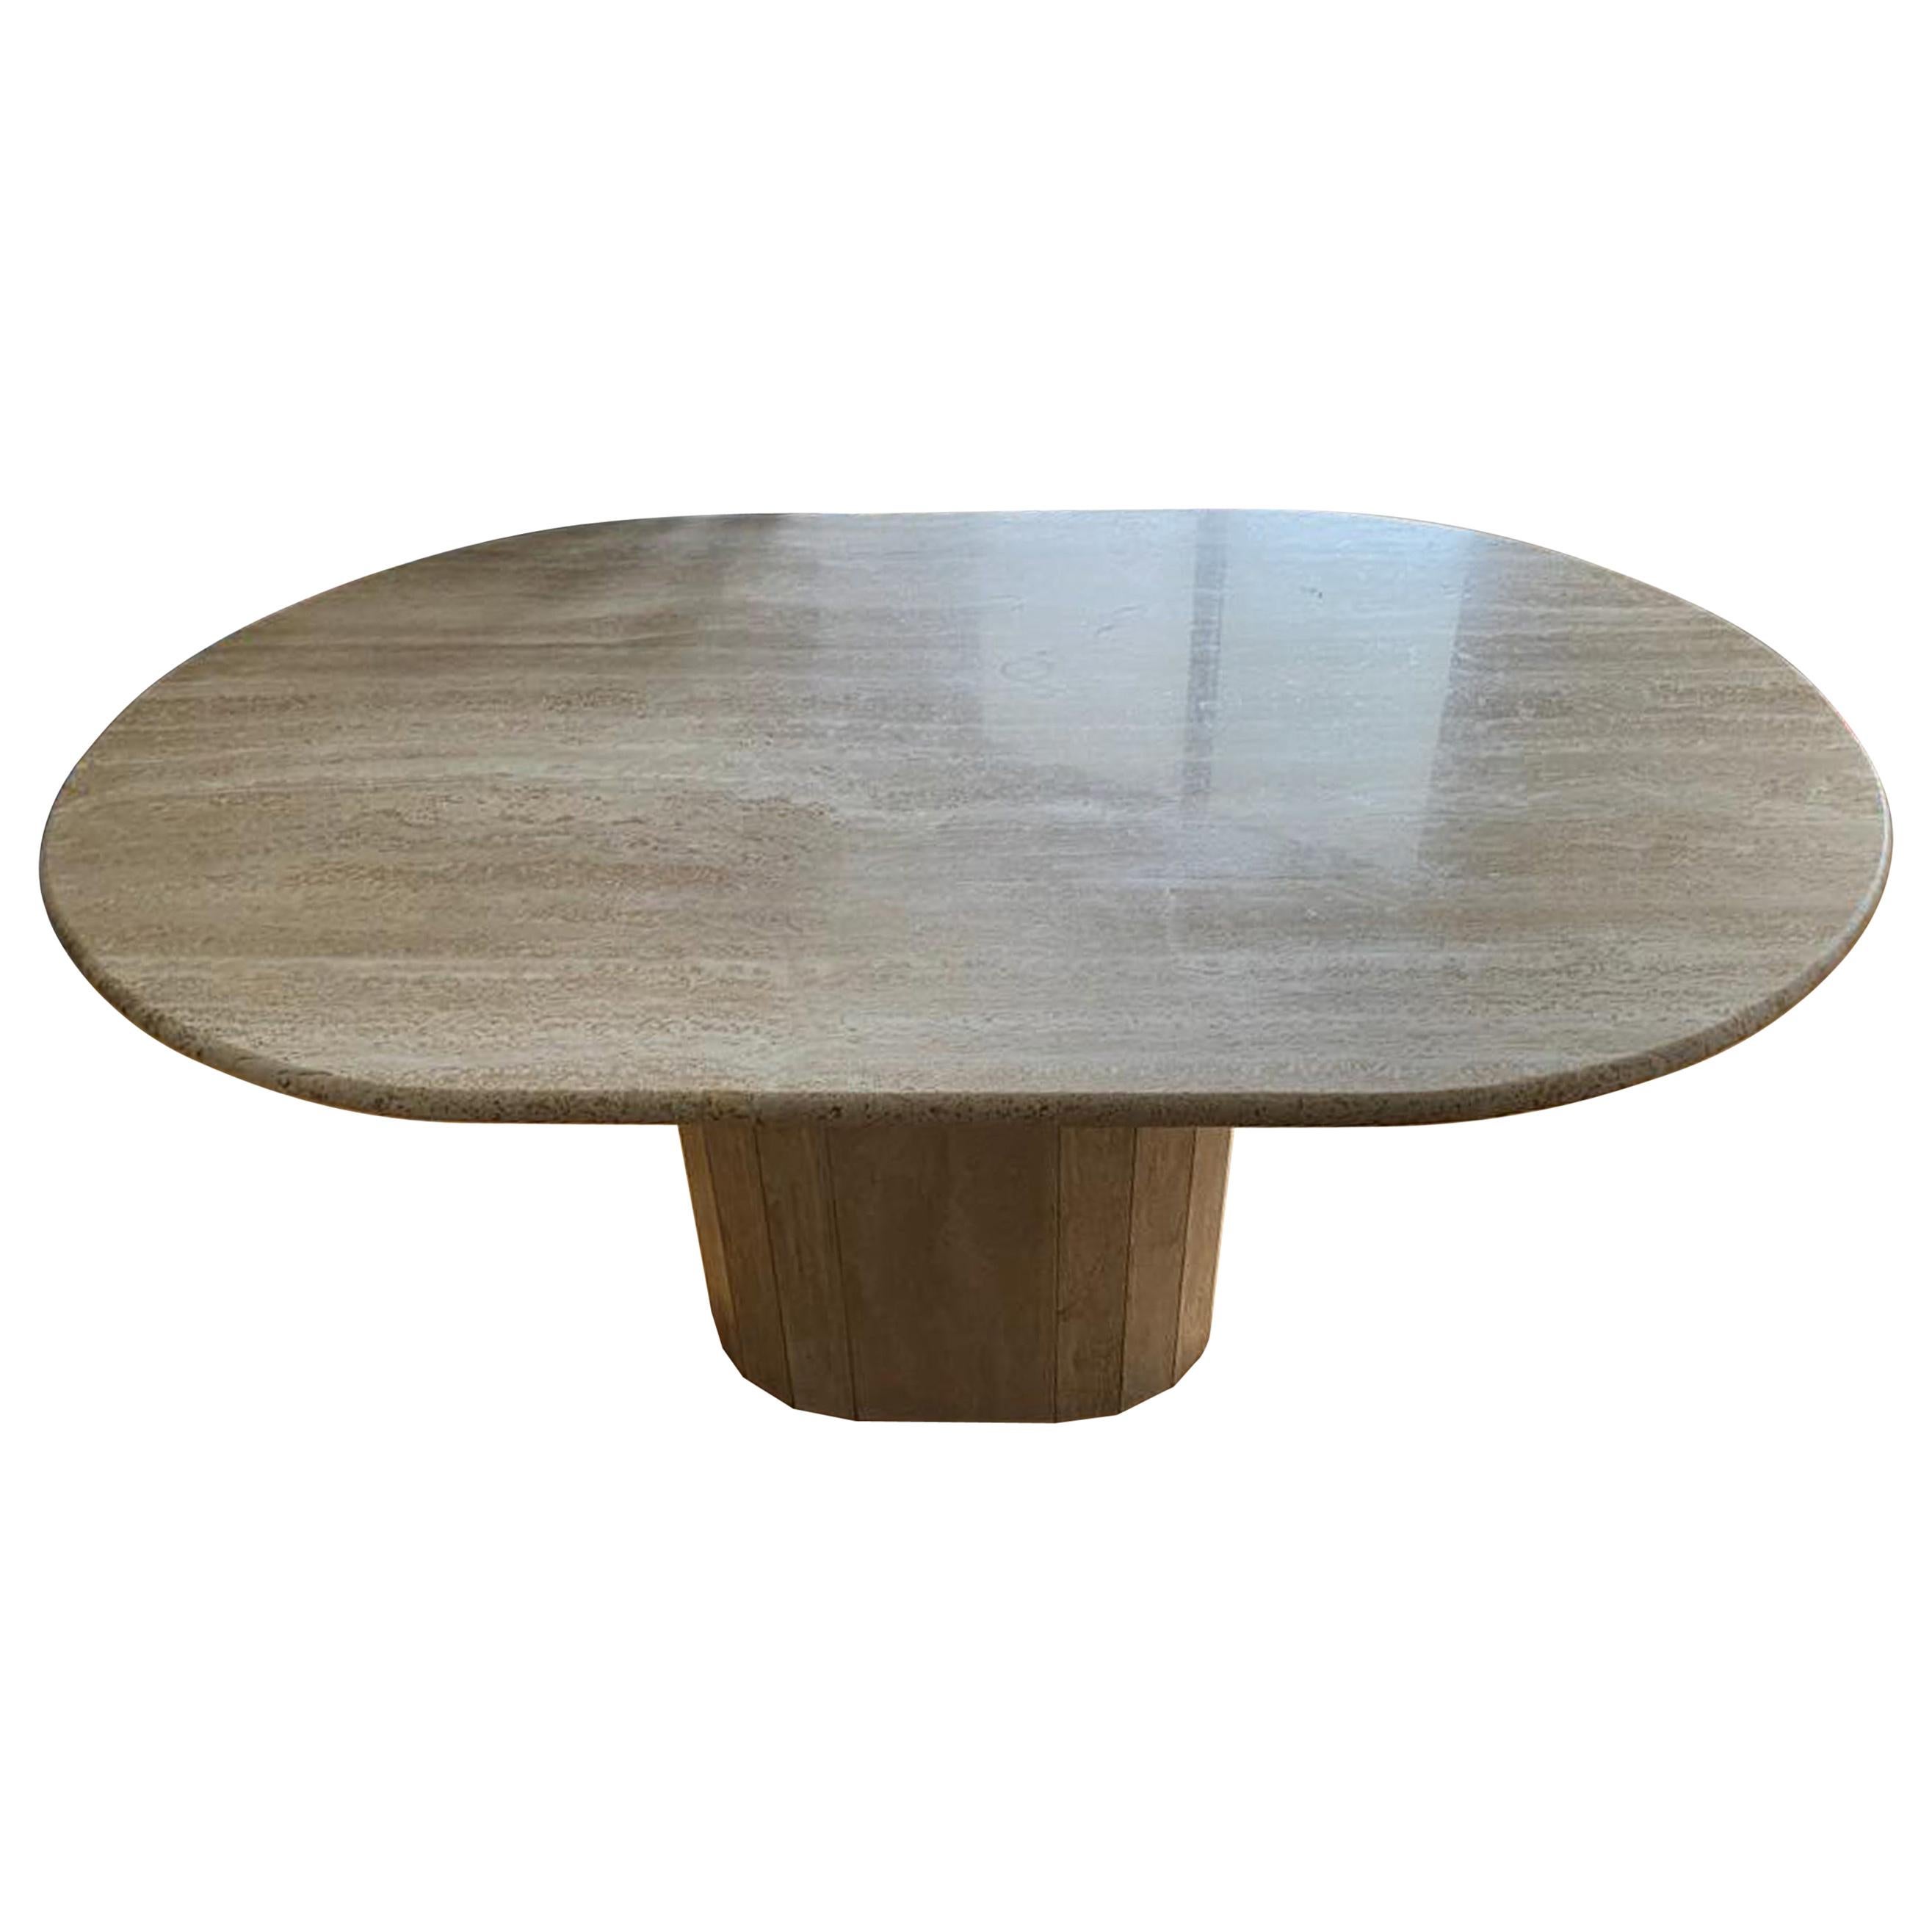 Post Modern Oval Cream Travertine Dining Table, Italy, 1970